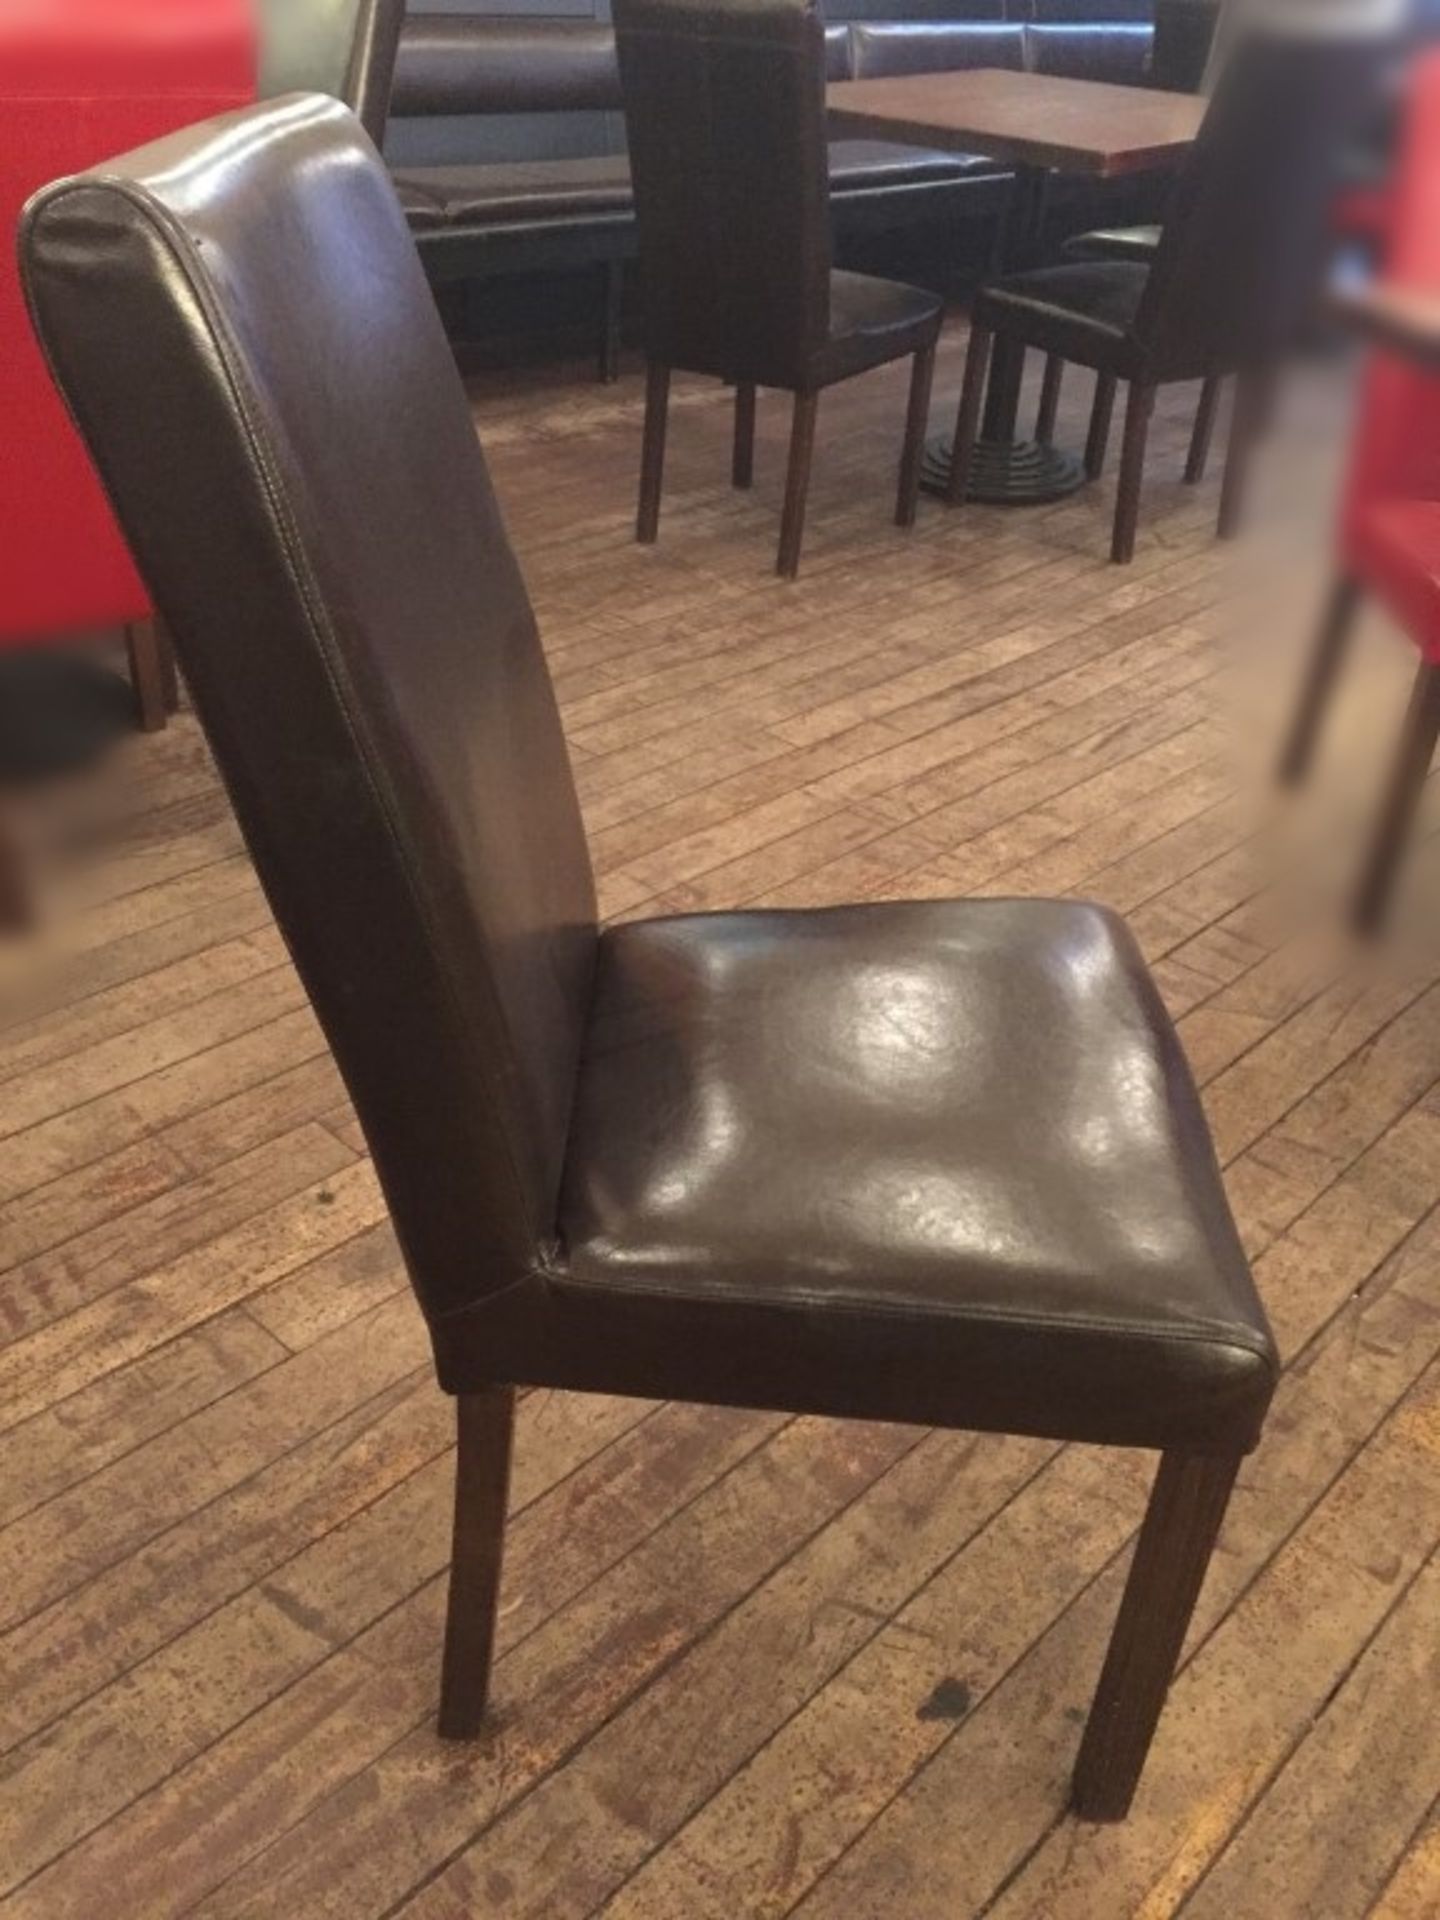 2 x Brown Faux Leather Dining Chairs - Seating Dimensions: 47 x 38cm x Height 100cm, Seat Height - Image 3 of 5